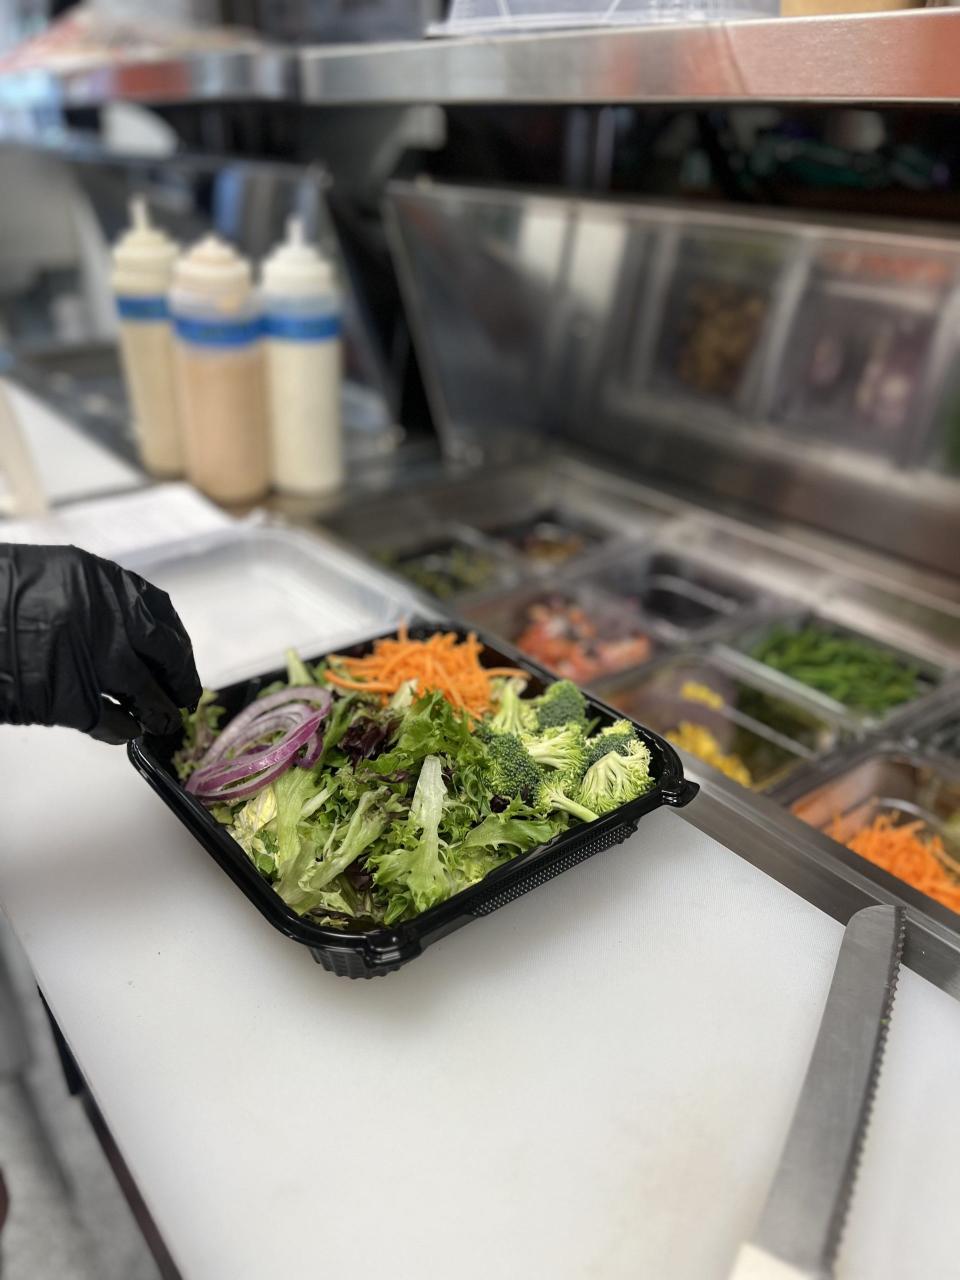 Salad 'n Dash is now open at 10 S. Jefferson St. serving made-to order salads and wraps along with craft beer, wine and canned cocktails in a drive-thru format.